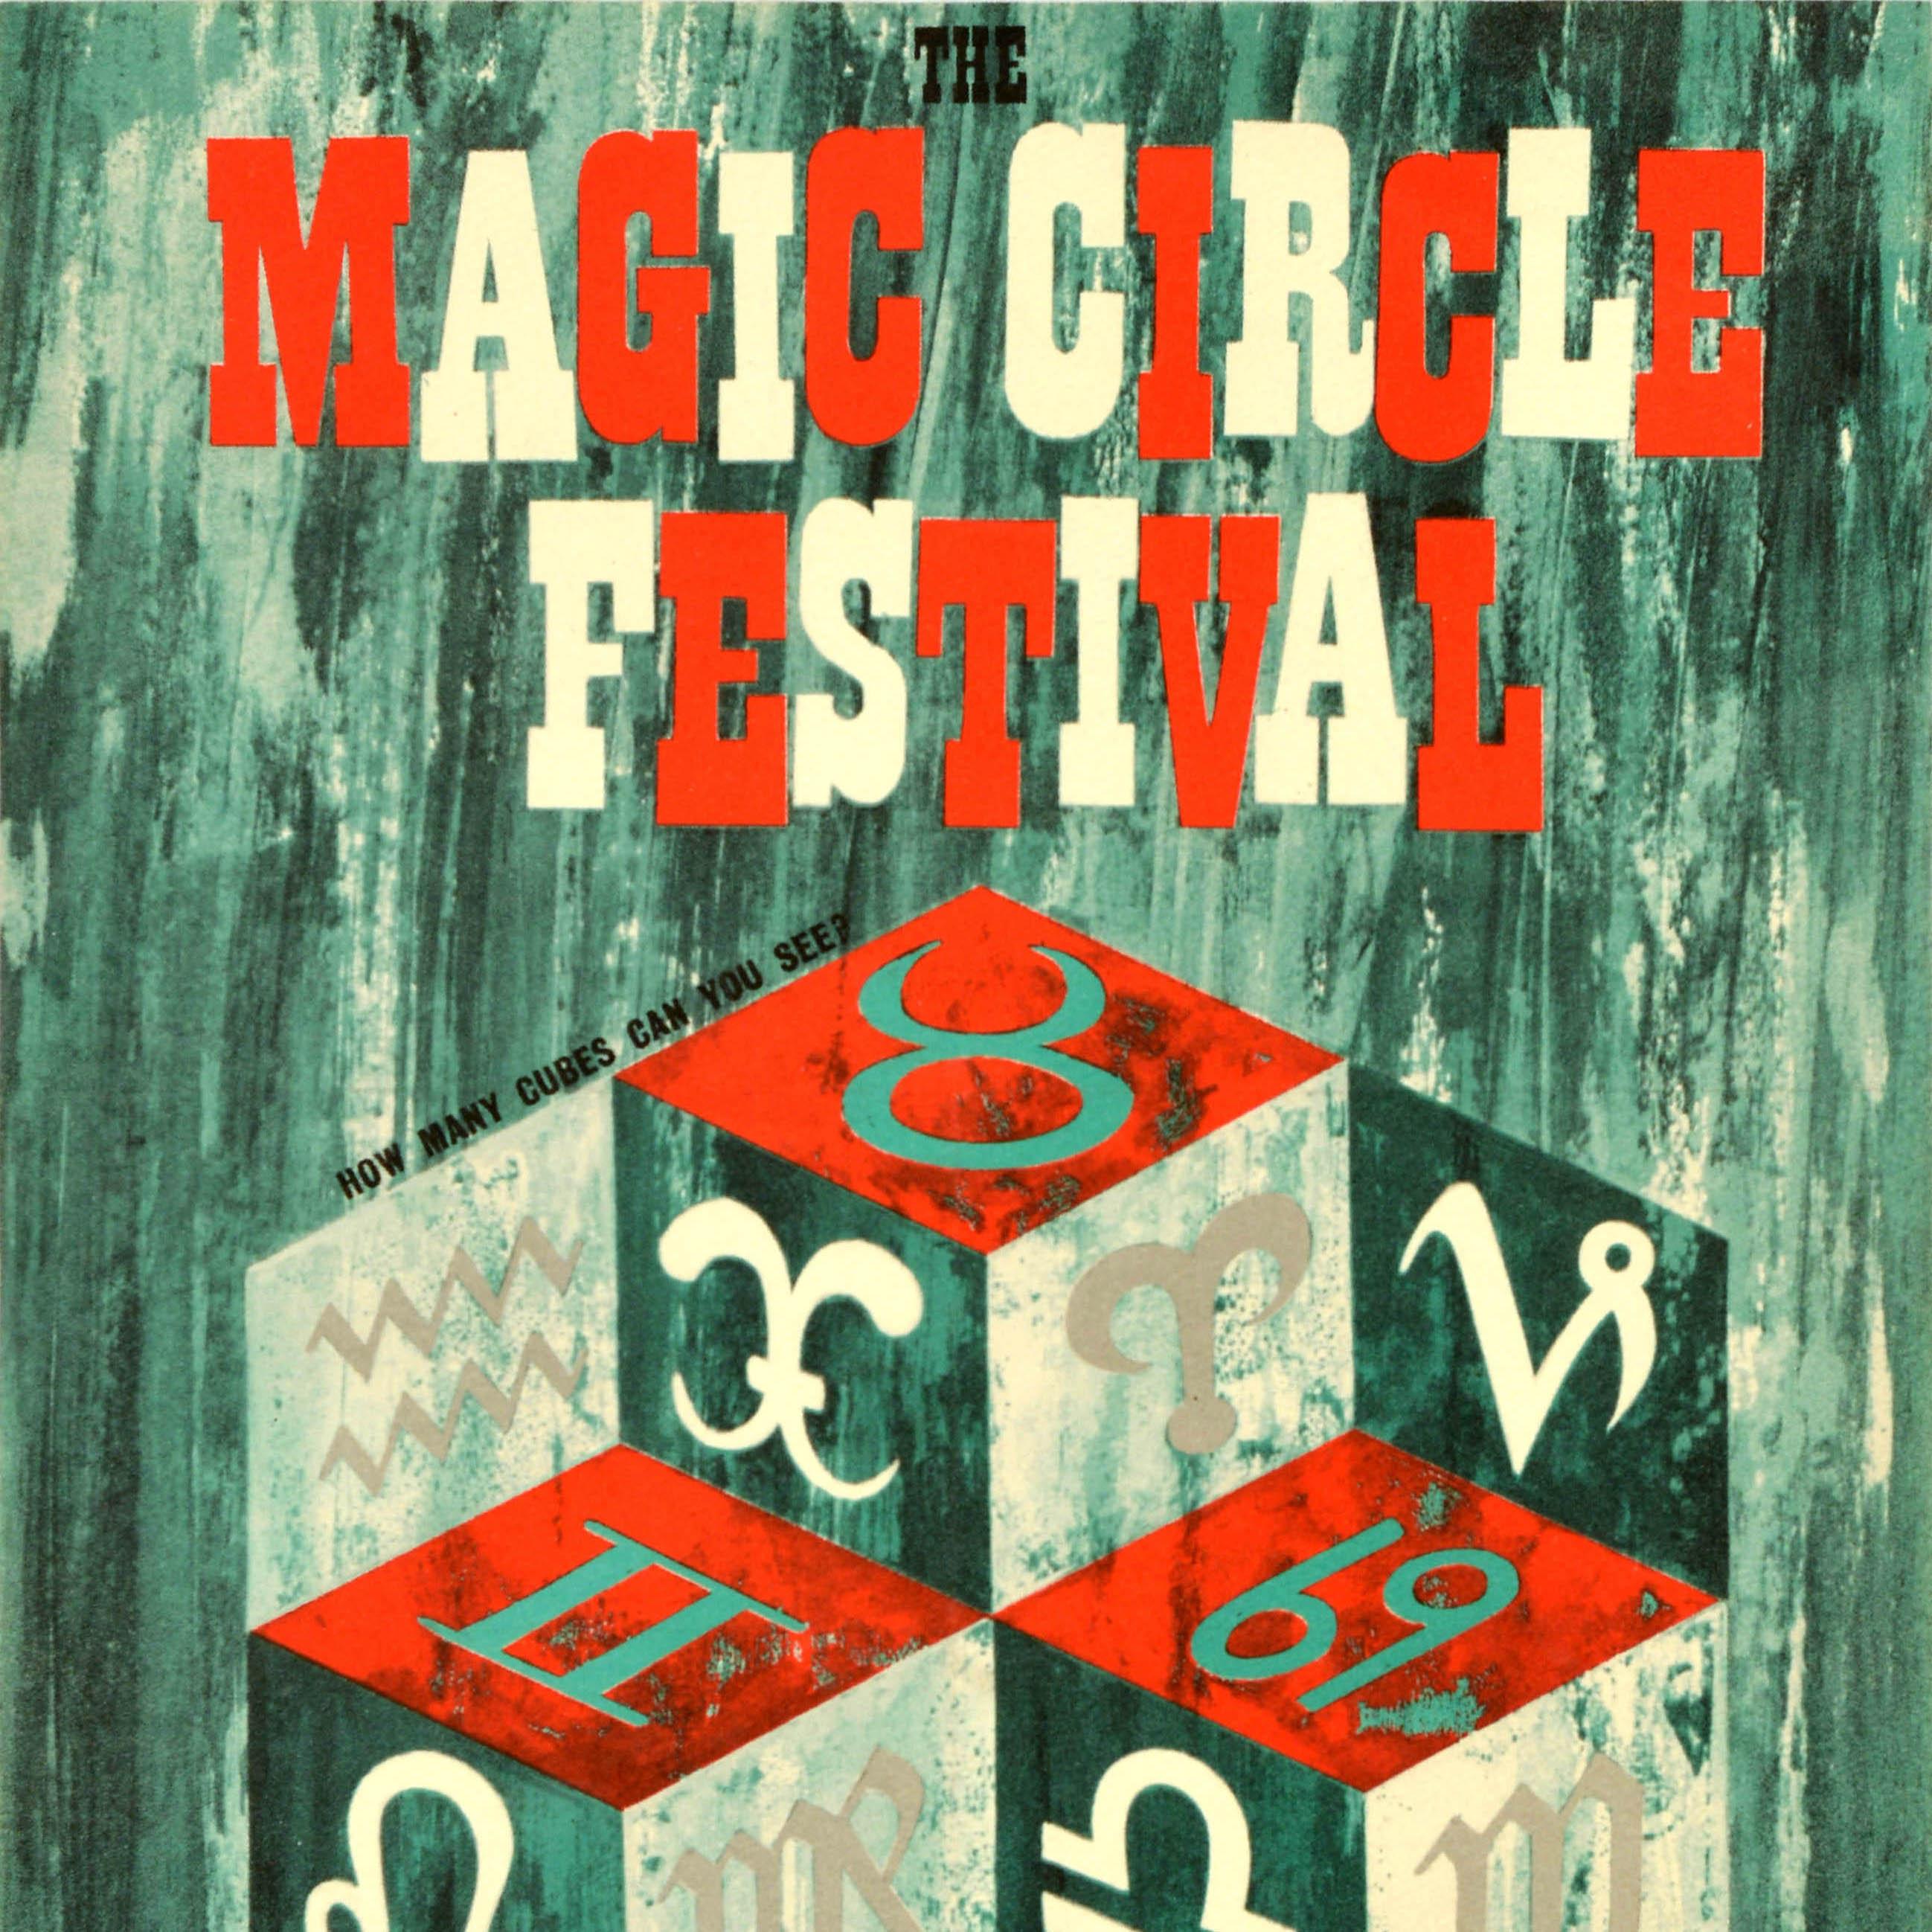 Original vintage advertising poster for The Magic Circle Festival Scala Theatre Charlotte St W1 9-14 October 1961 For One Week Only featuring a great design depicting green, red and white shapes as an optical illusion with zodiac symbols / horoscope